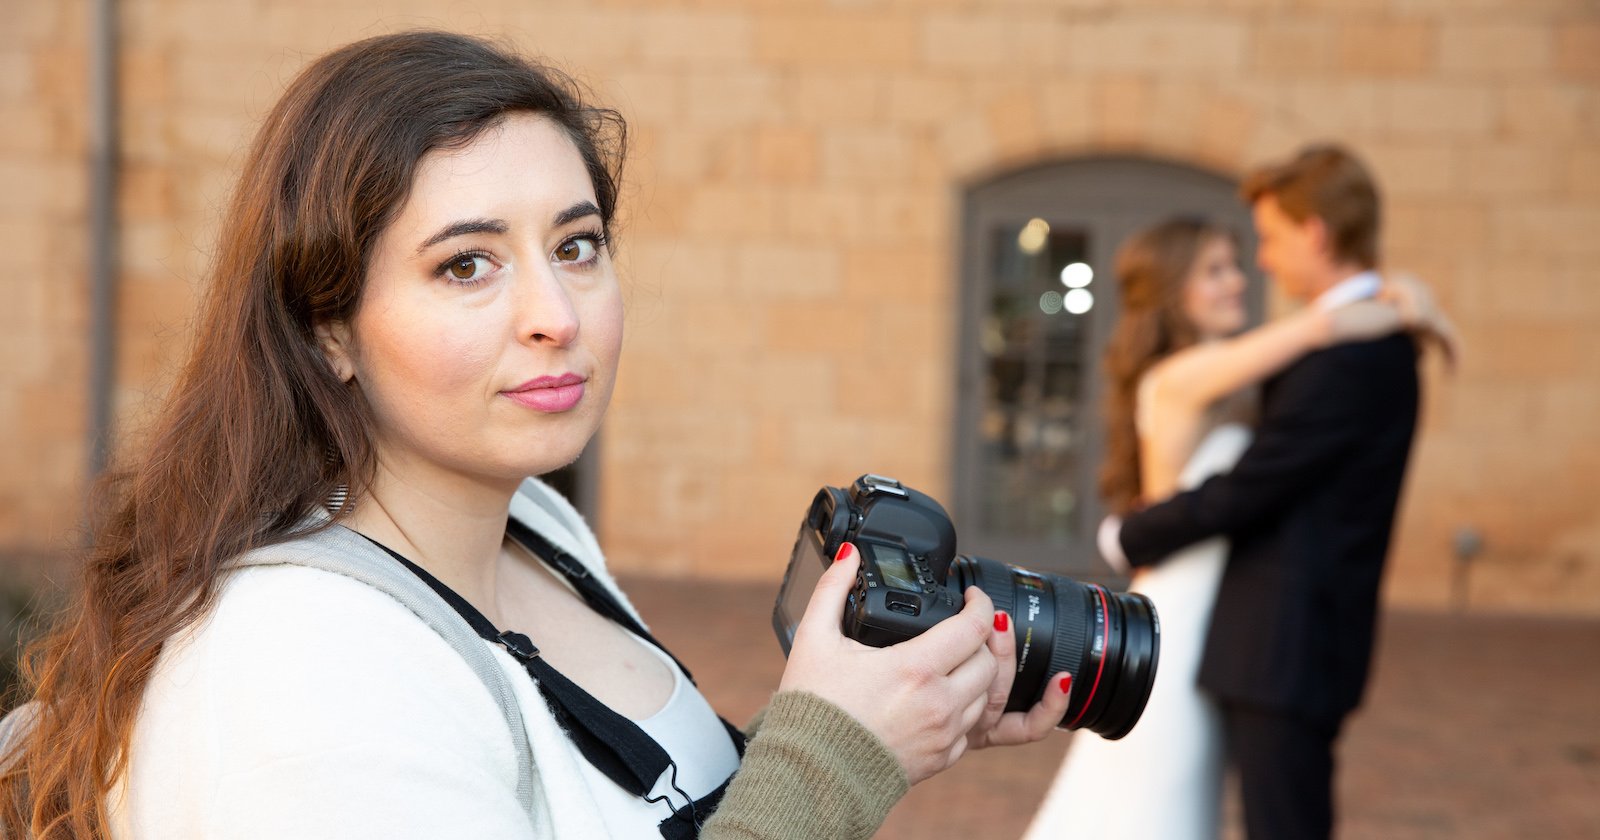 Christian Photographer Sues City Over Law that Could Force Her to Shoot Same-Sex Weddings